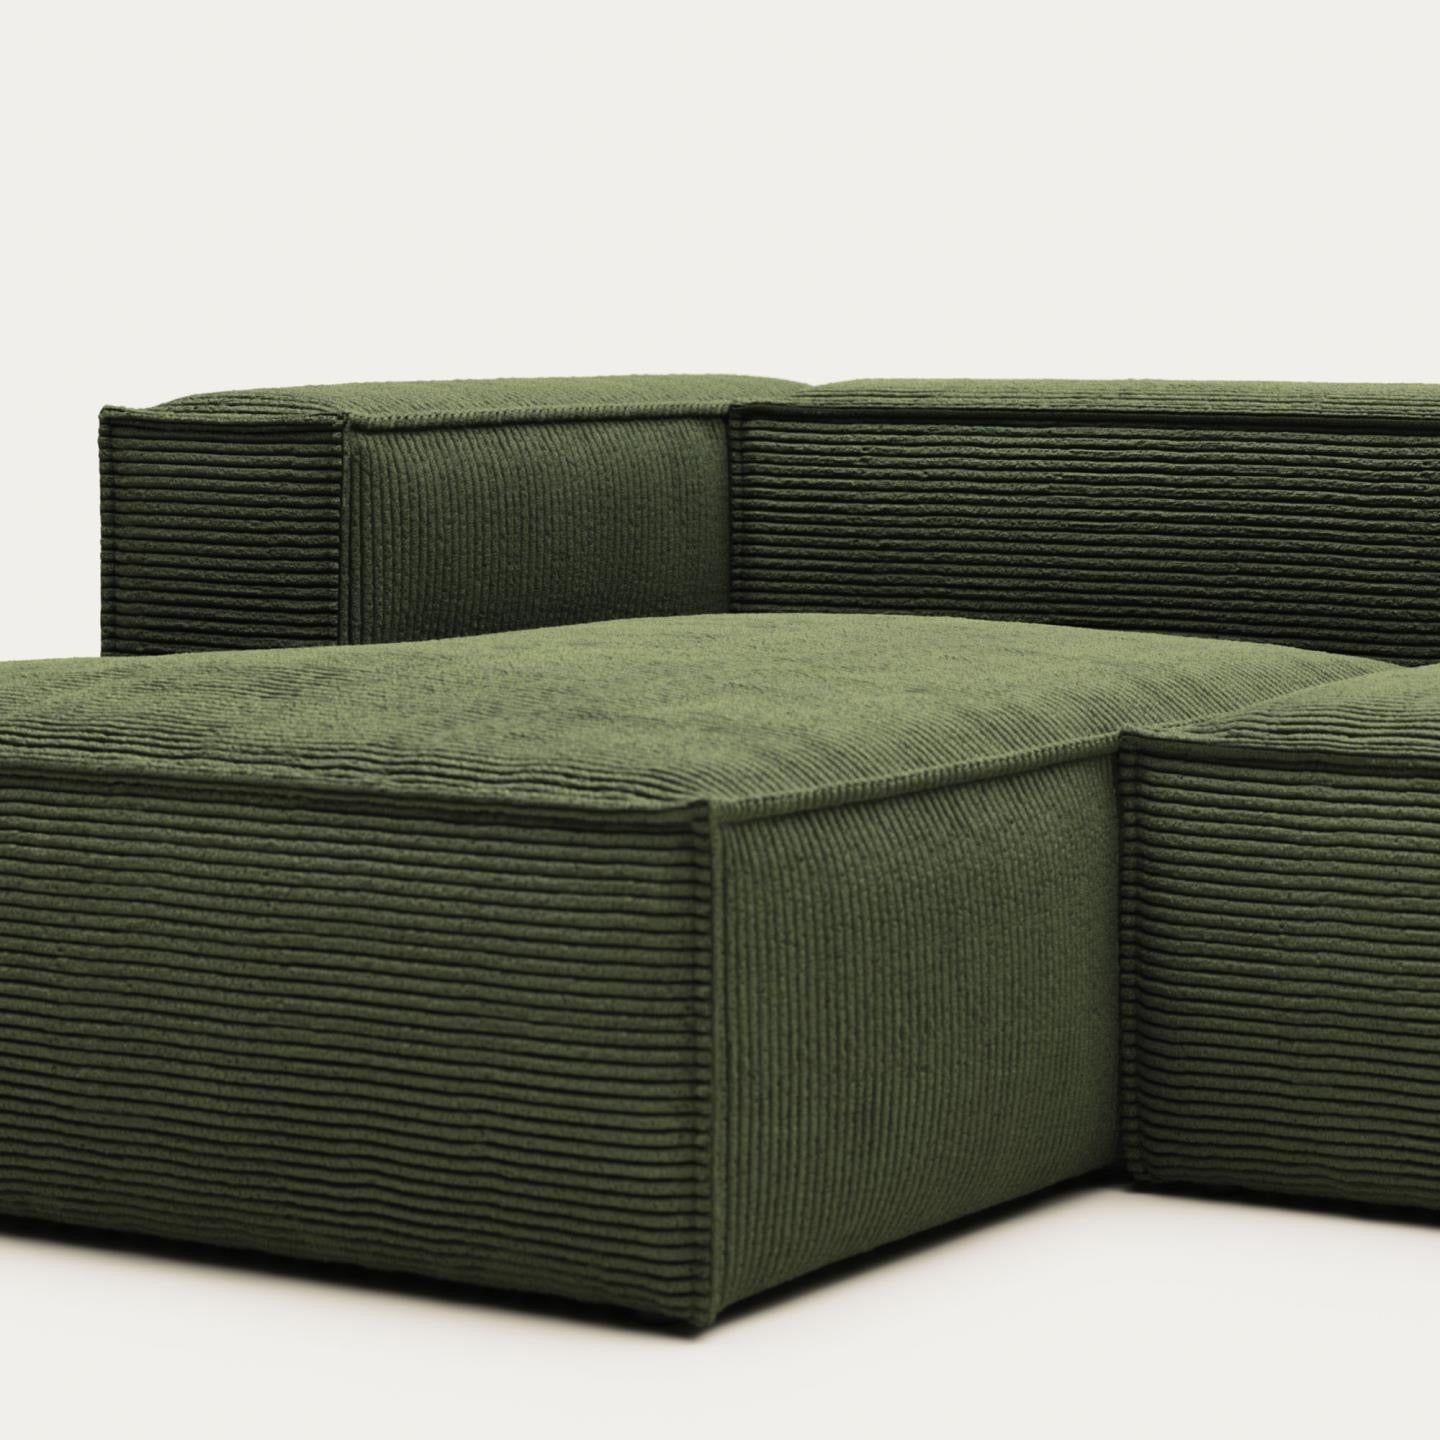 Lund 4 Seater Sofa with Left Side Chaise - Green Corduroy